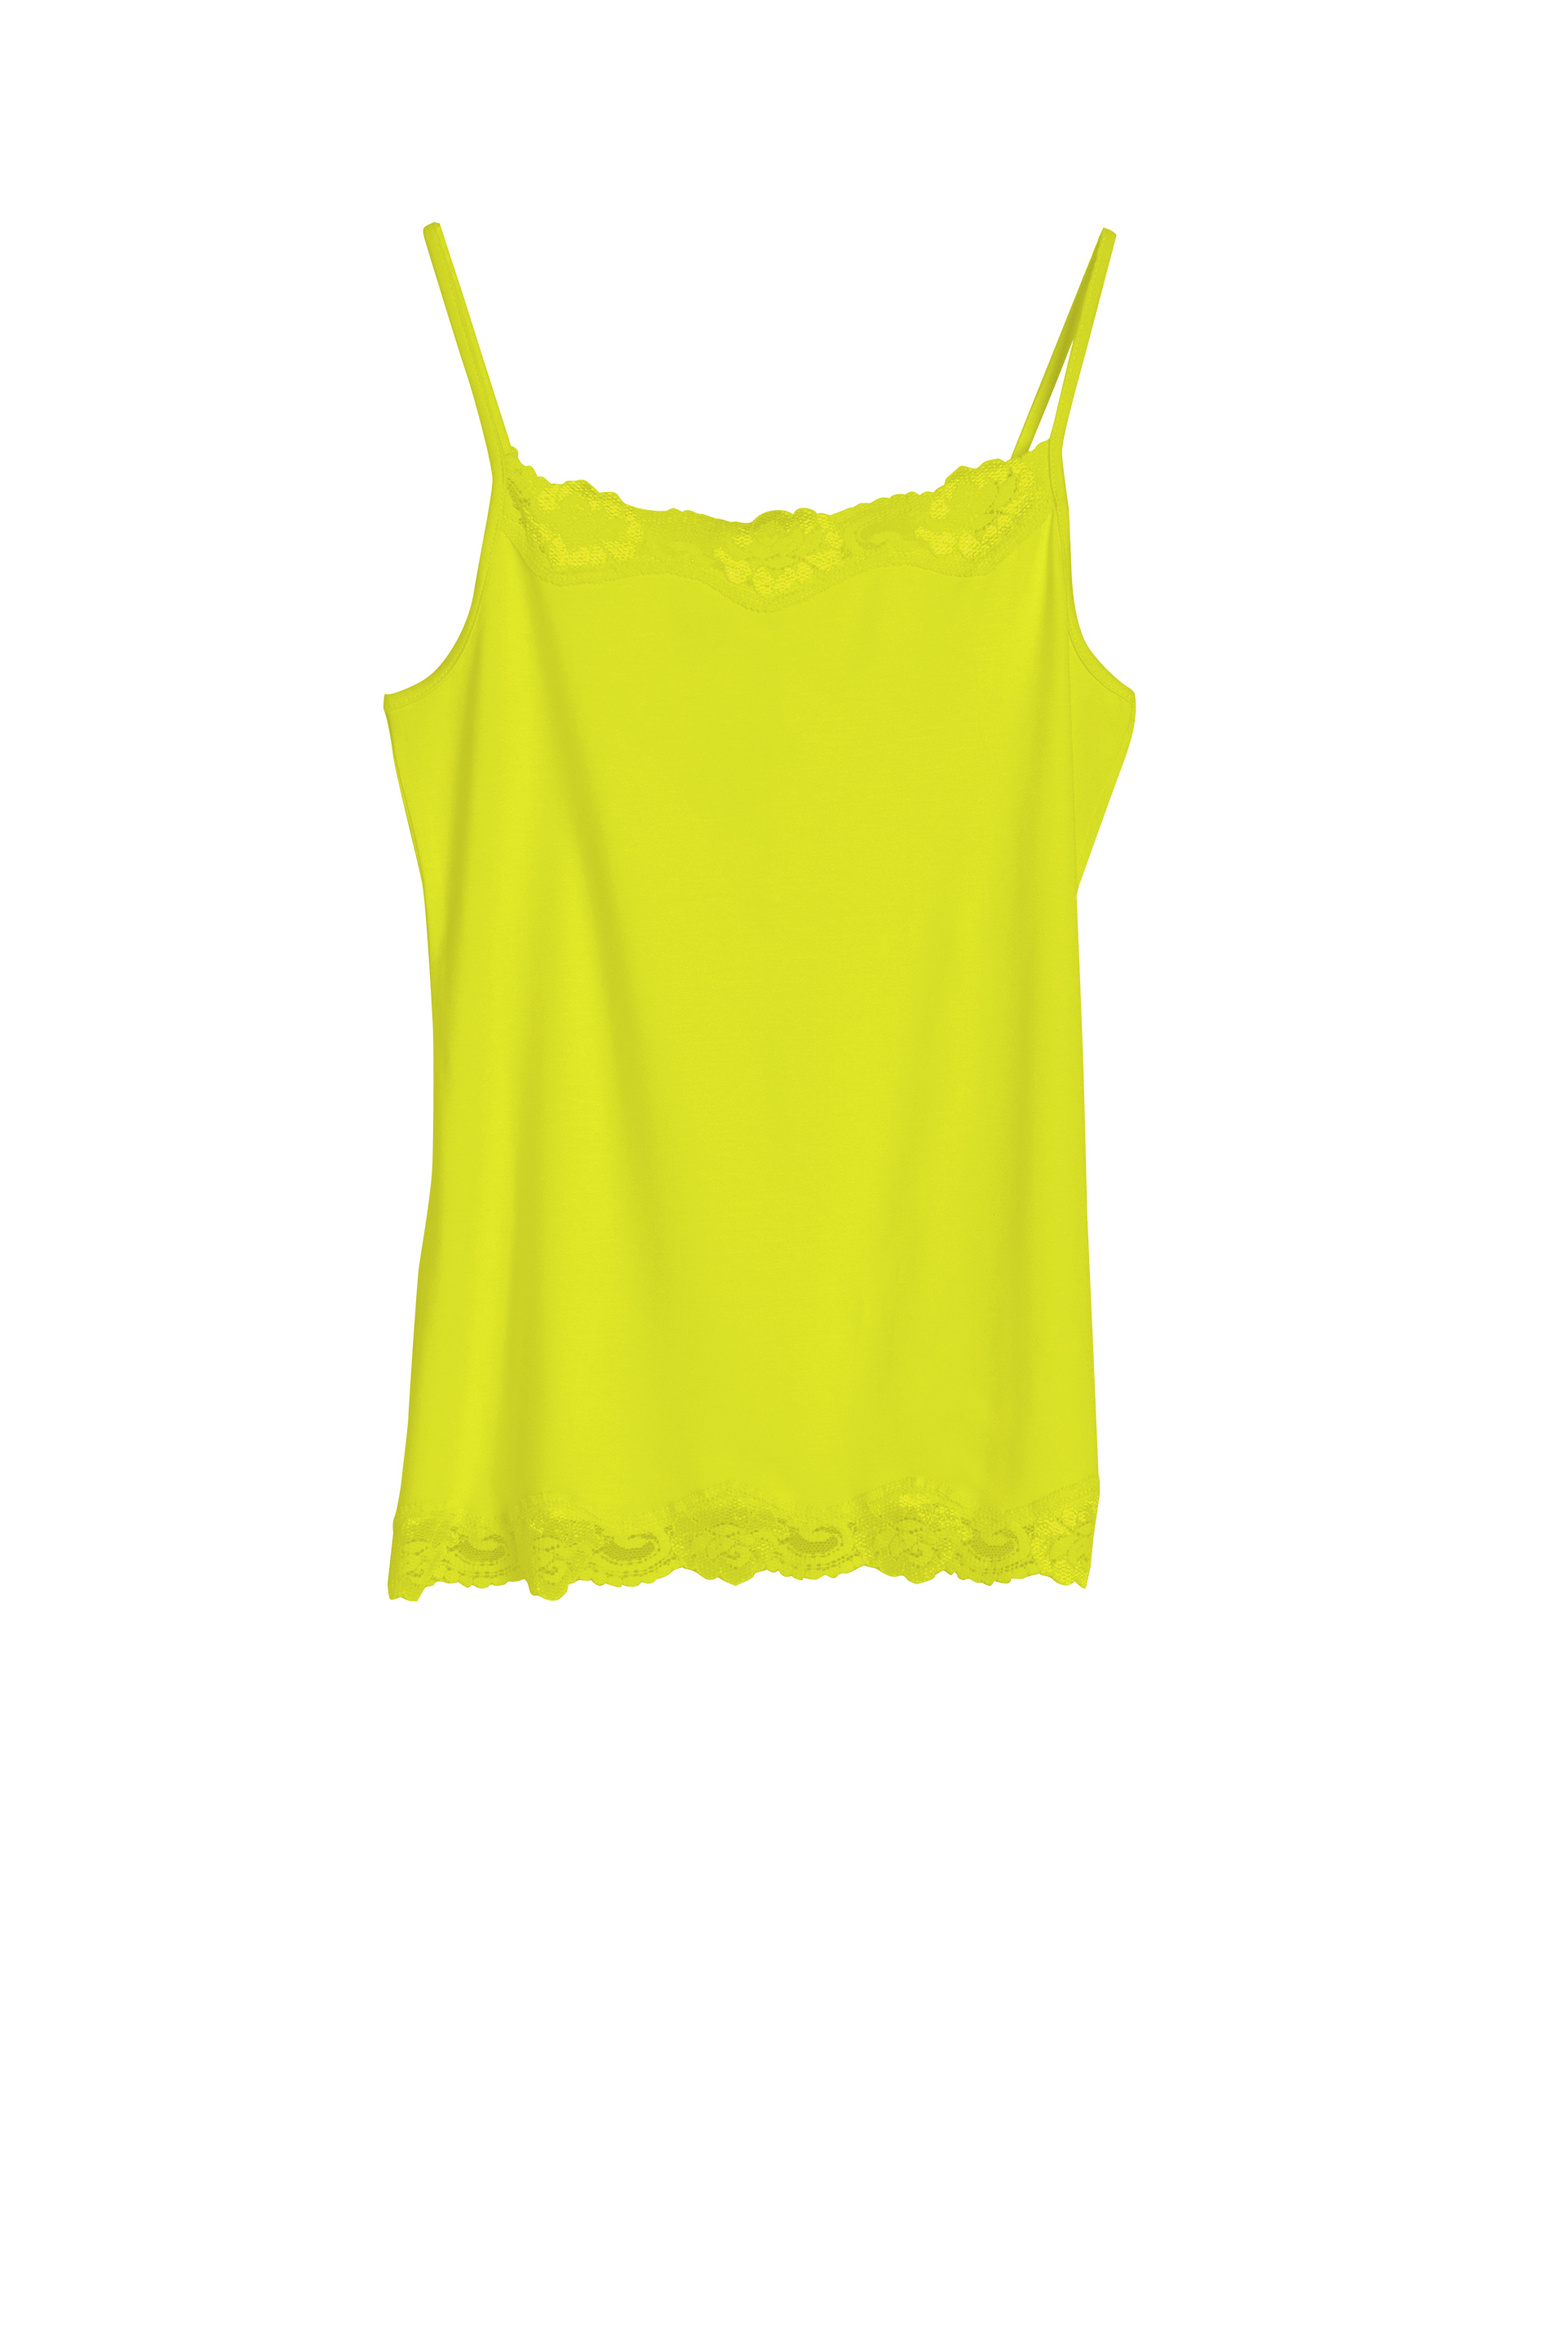 7200_lace_camisole_neon_yellow_new.jpg